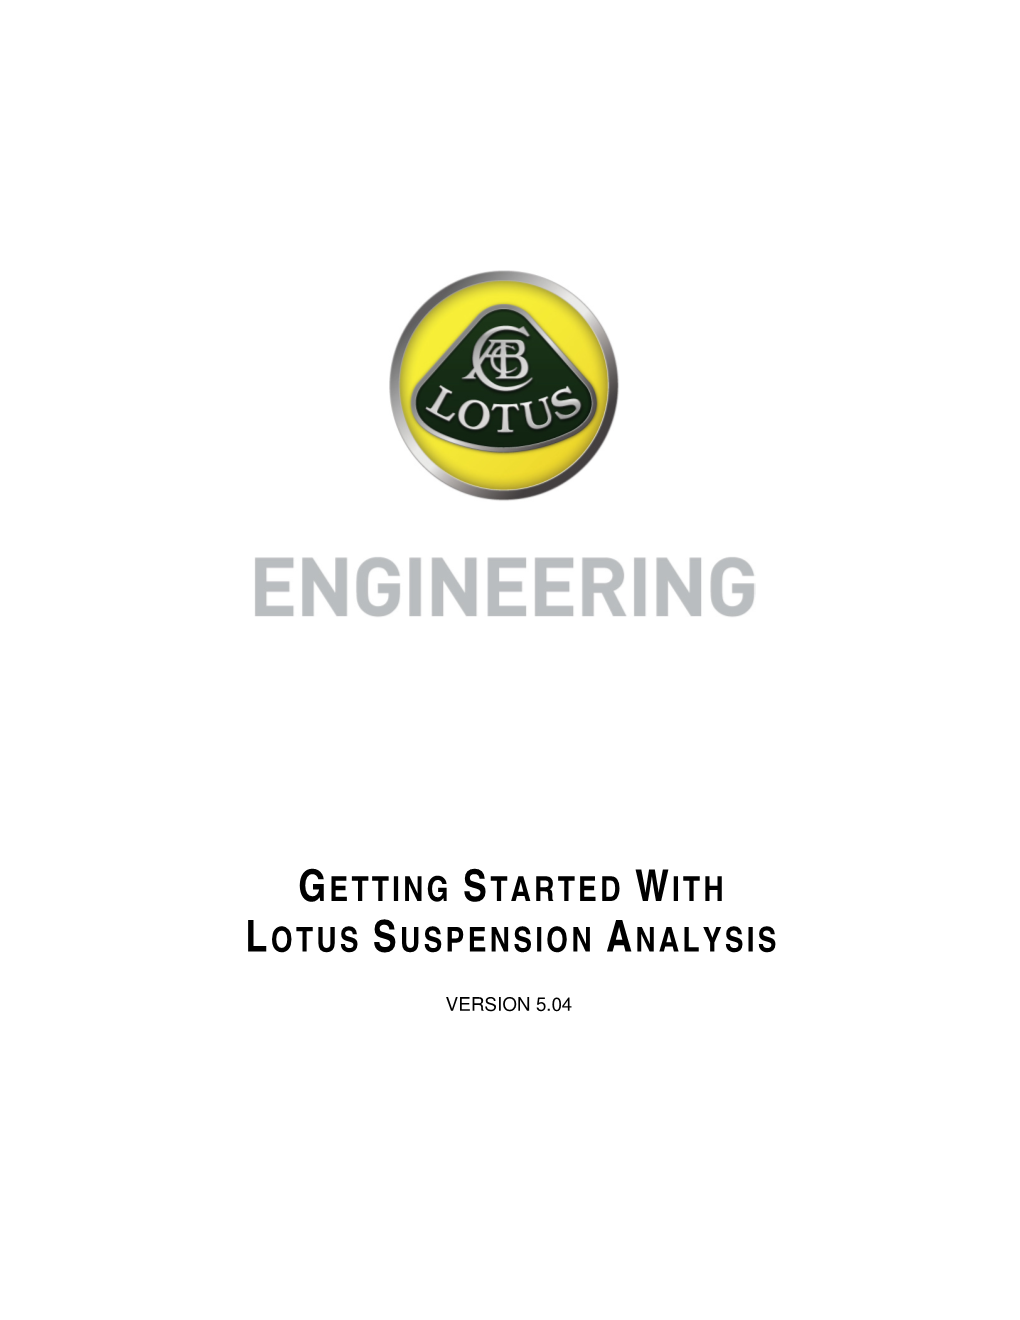 Getting Started with Lotus Suspension Analysis